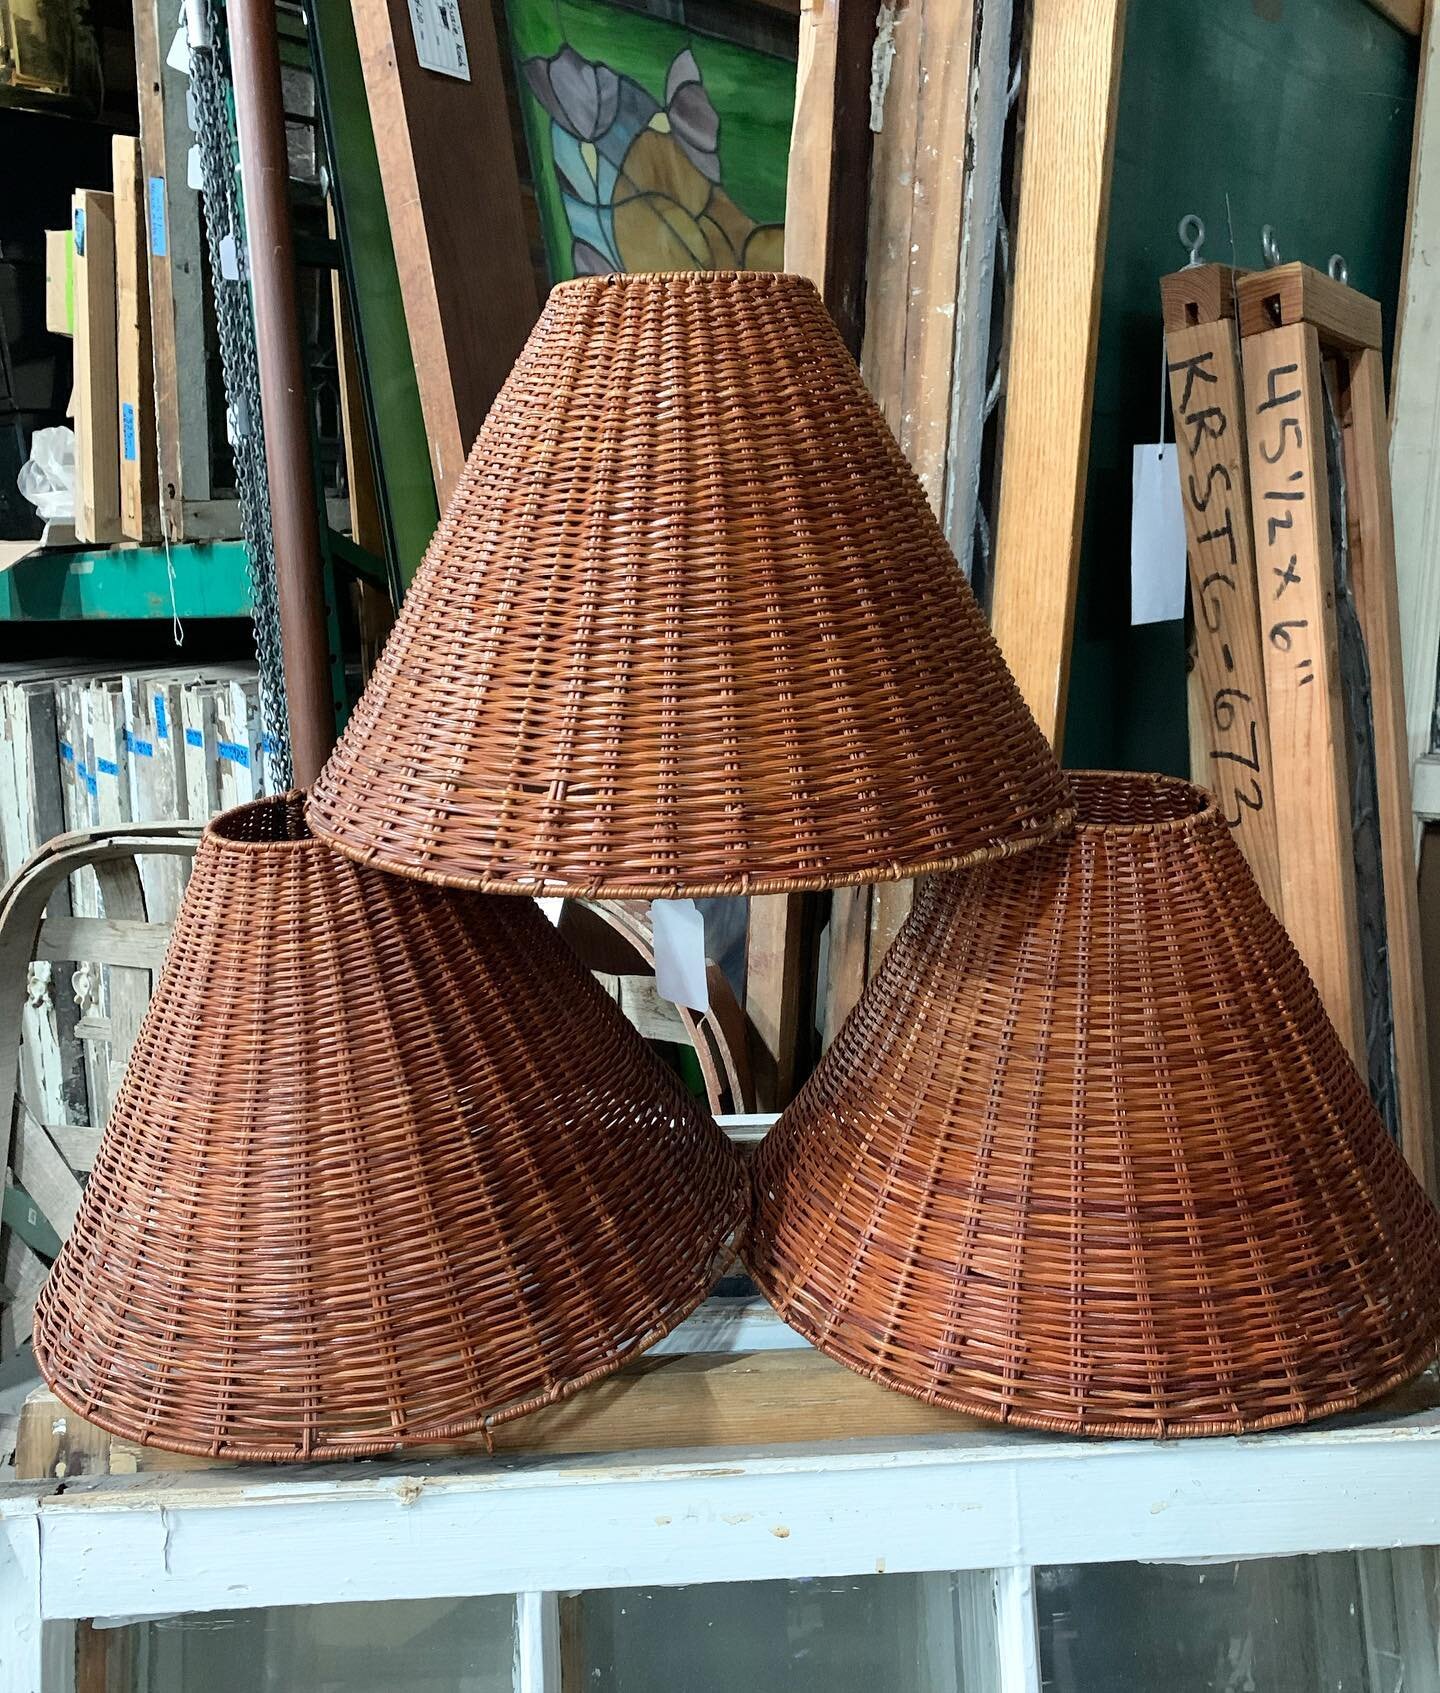 Details- a woven shade on a ceramic lamp, quaint numbers, beautiful sconces #antiques #design #interiors #interiordesign #salvage #shoptampa #tampaantiques #tampavintage